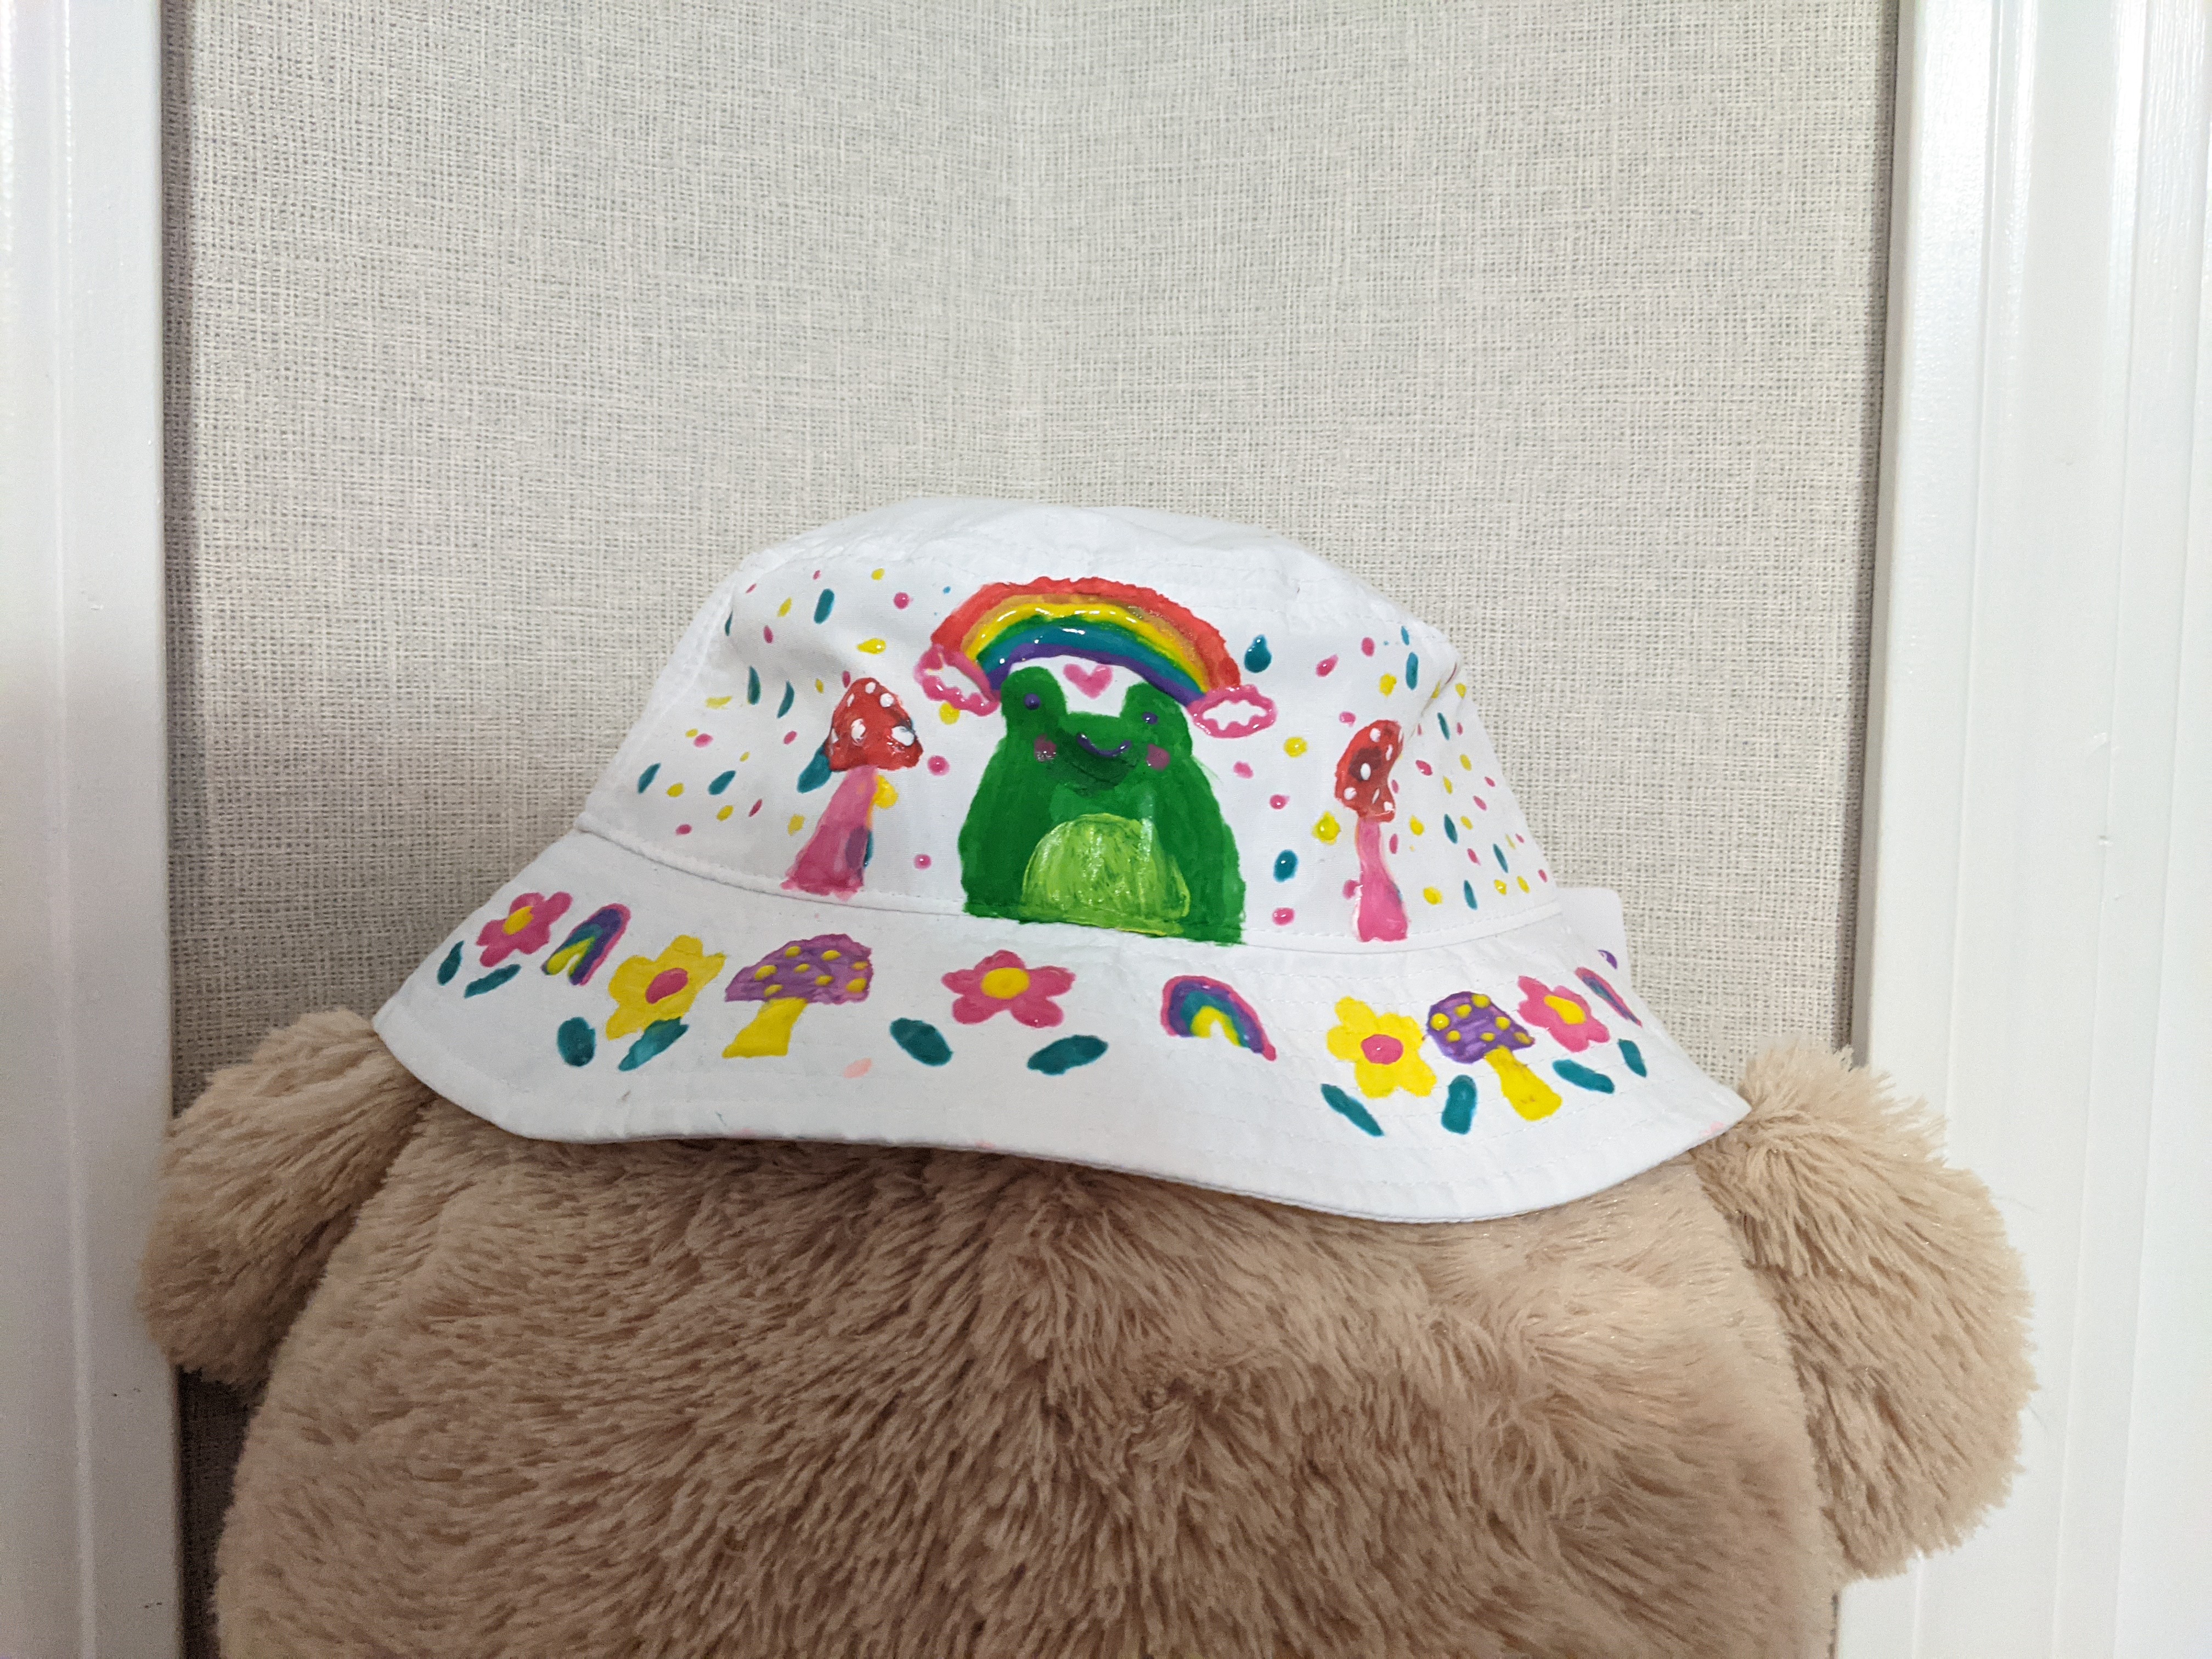 Image for "Paint a Hat"